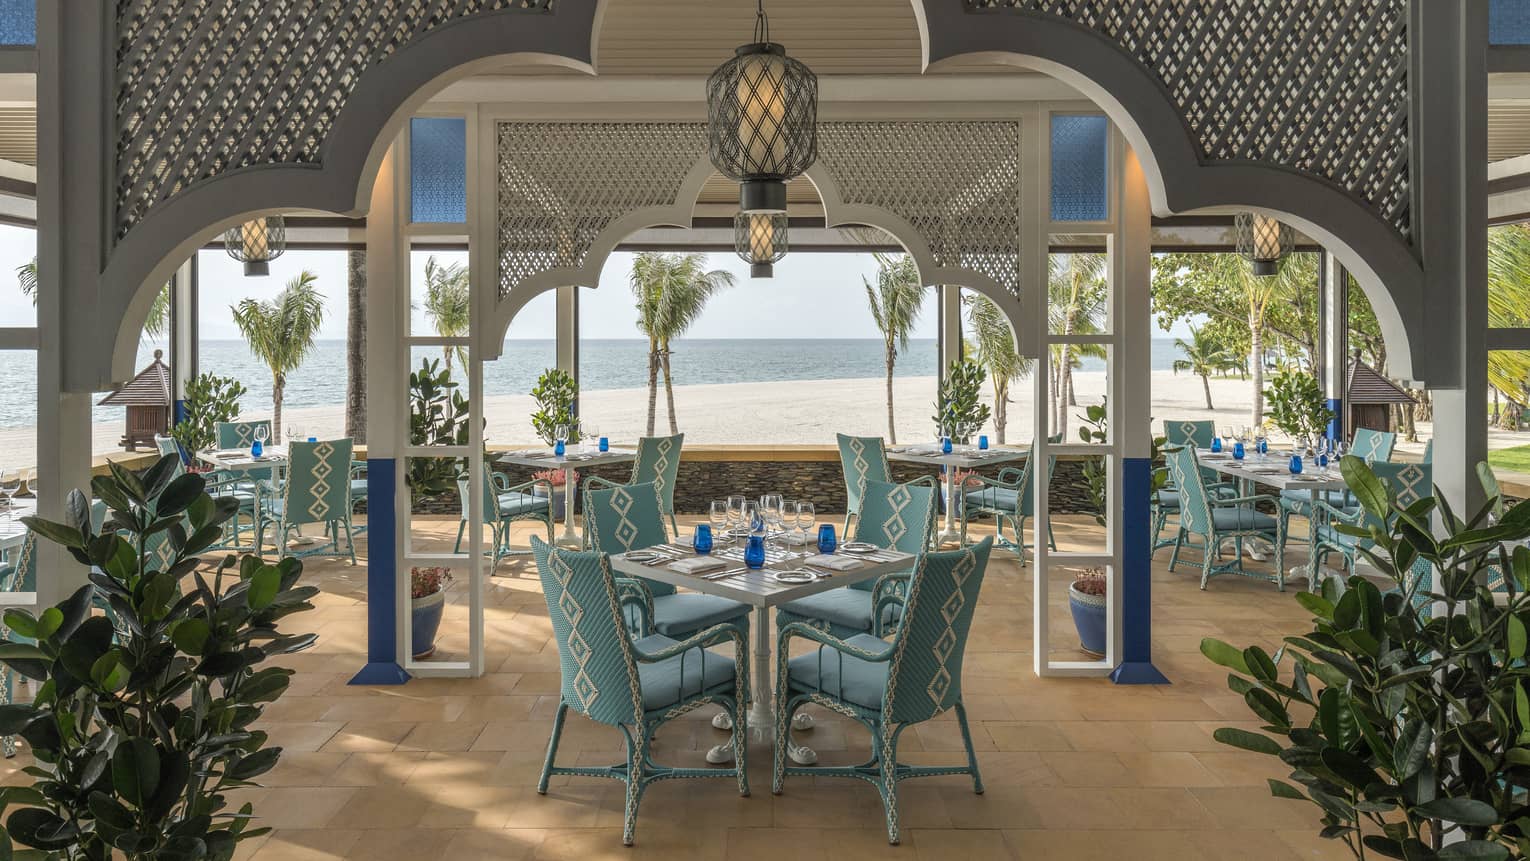 Upper Serai Restaurant dining area overlooking the beach with palm trees